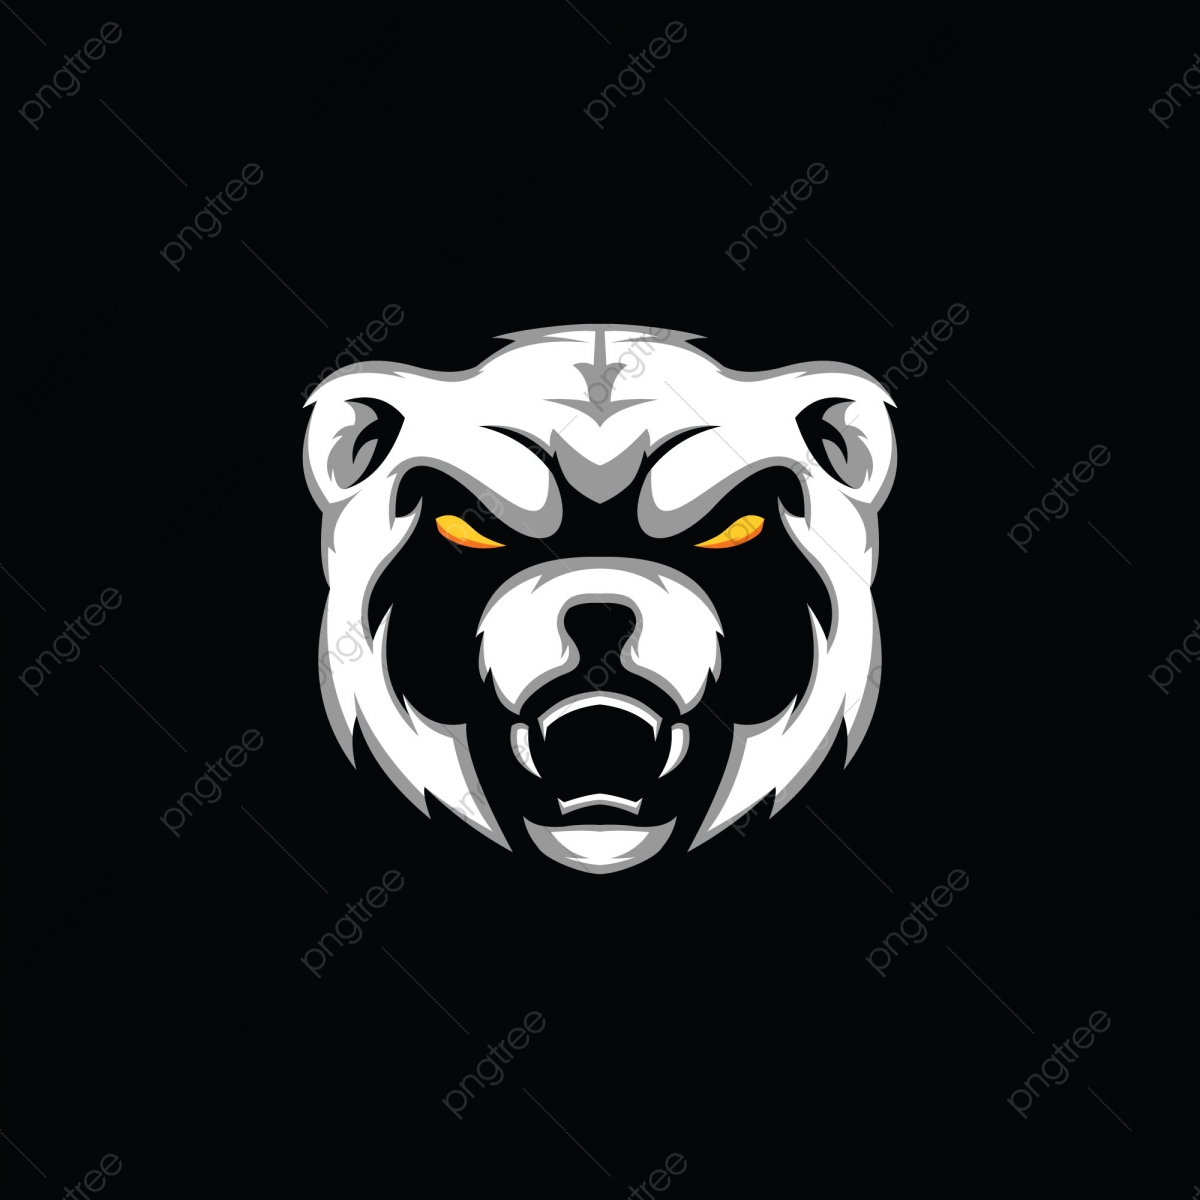 Angry Panda Head Graphic Illustration, Design, Logo, Illustration PNG and Vector with Transparent Background for Free Download